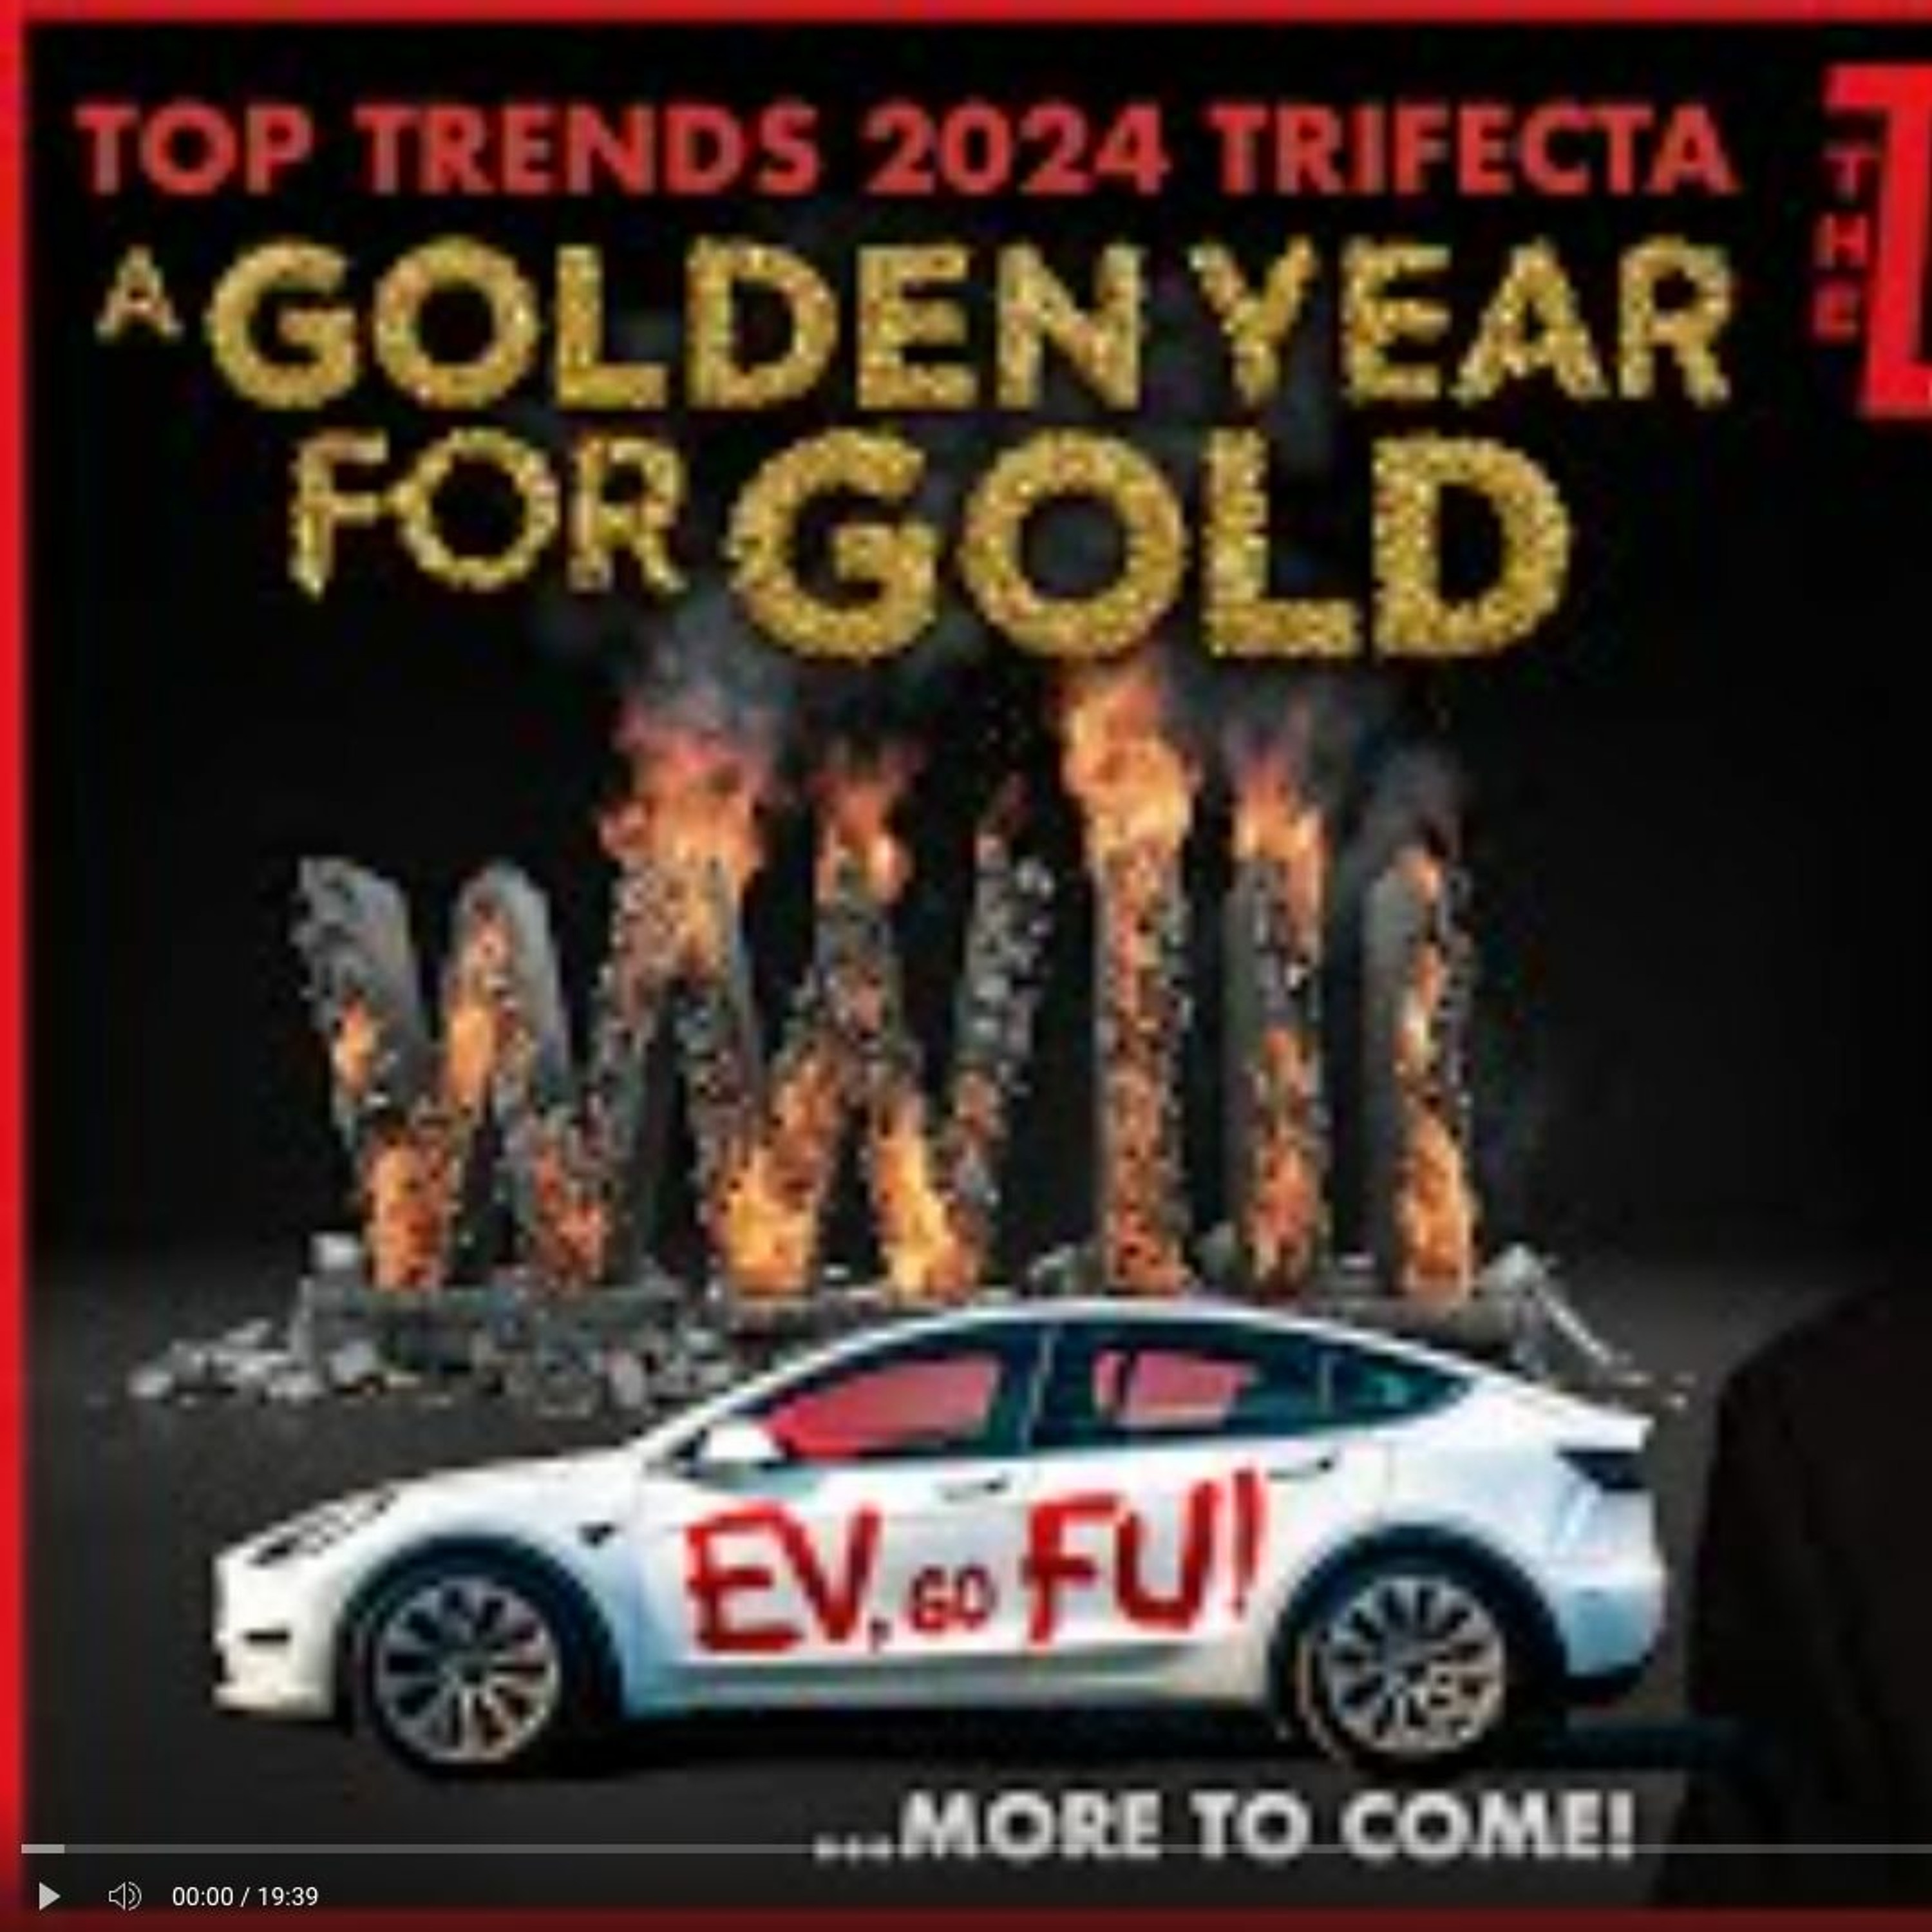 TOP TRENDS 2024 TRIFECTA: A GOLDEN YEAR FOR GOLD, WW III, EV GO FU